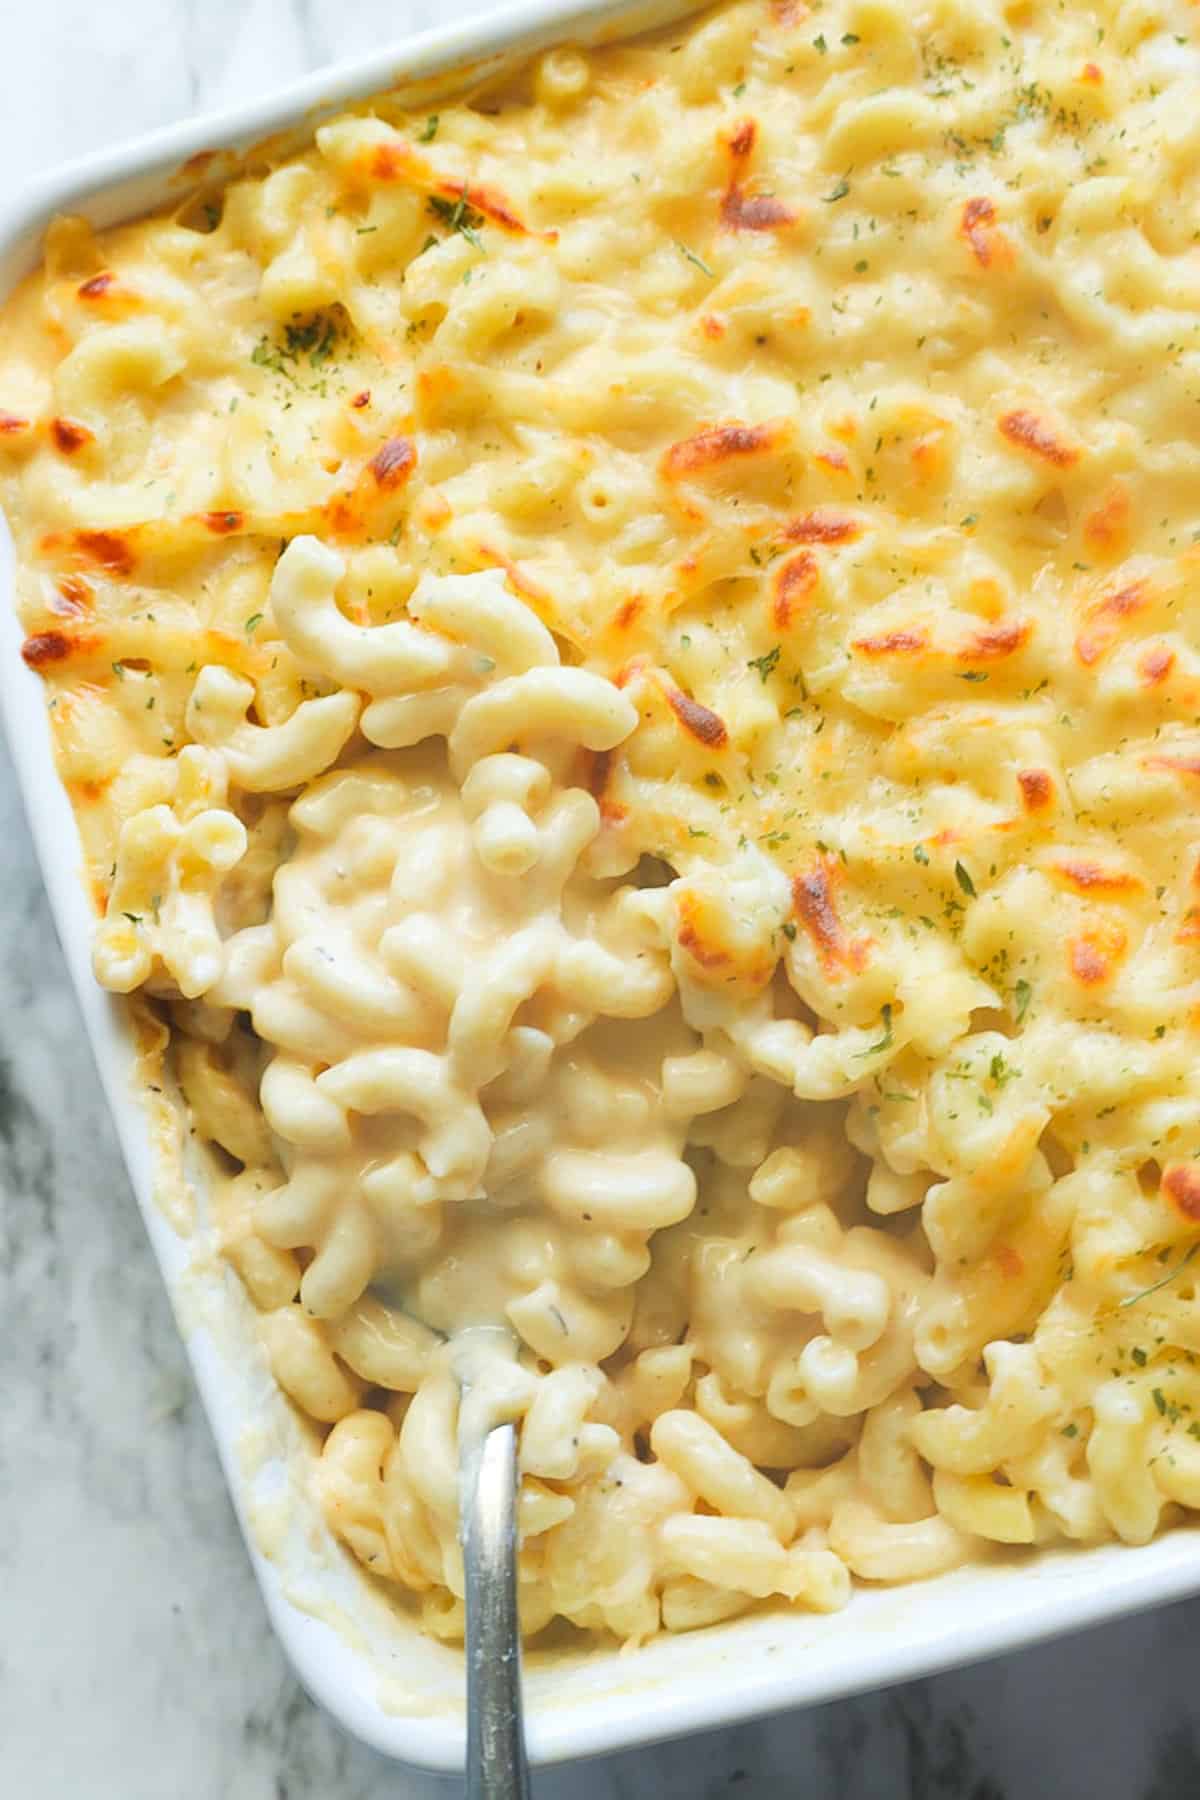 Serving up creamy, decadent smoked Gouda mac and cheese